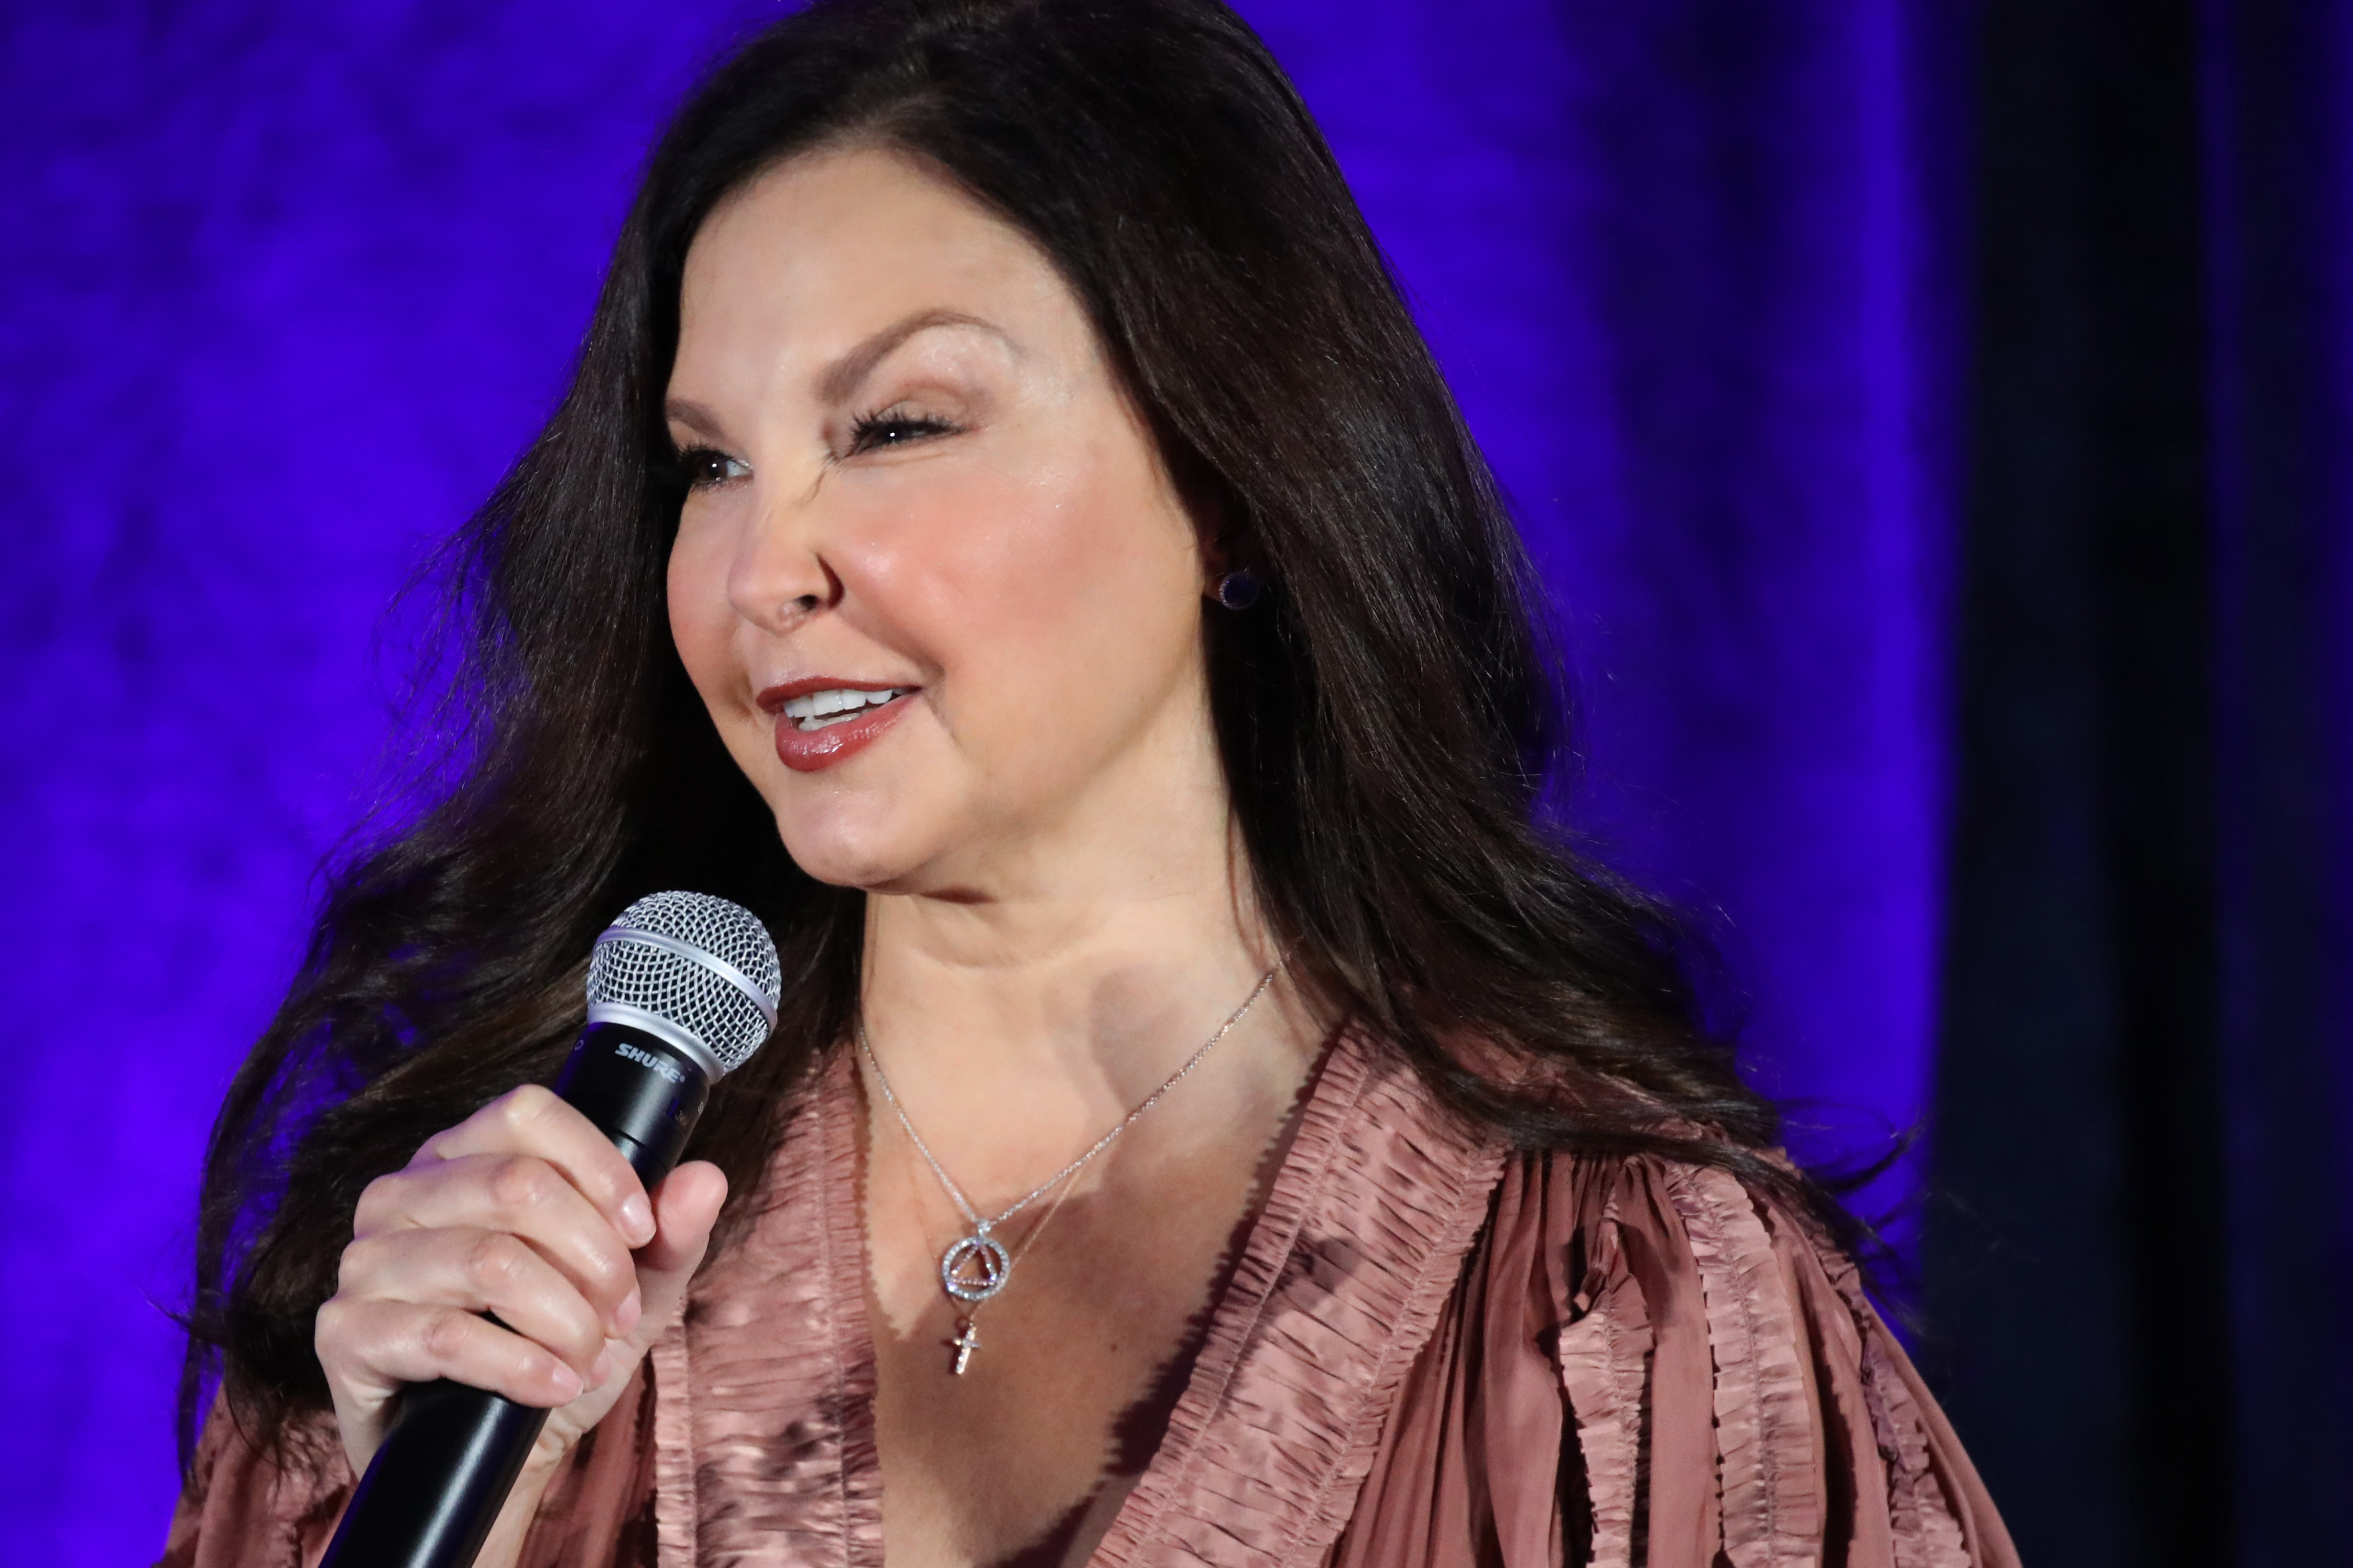 Ashley Judd speaks during the Clinton Global Initiative (CGI) Meeting in New York City, on September 20, 2022. | Source: Getty Images